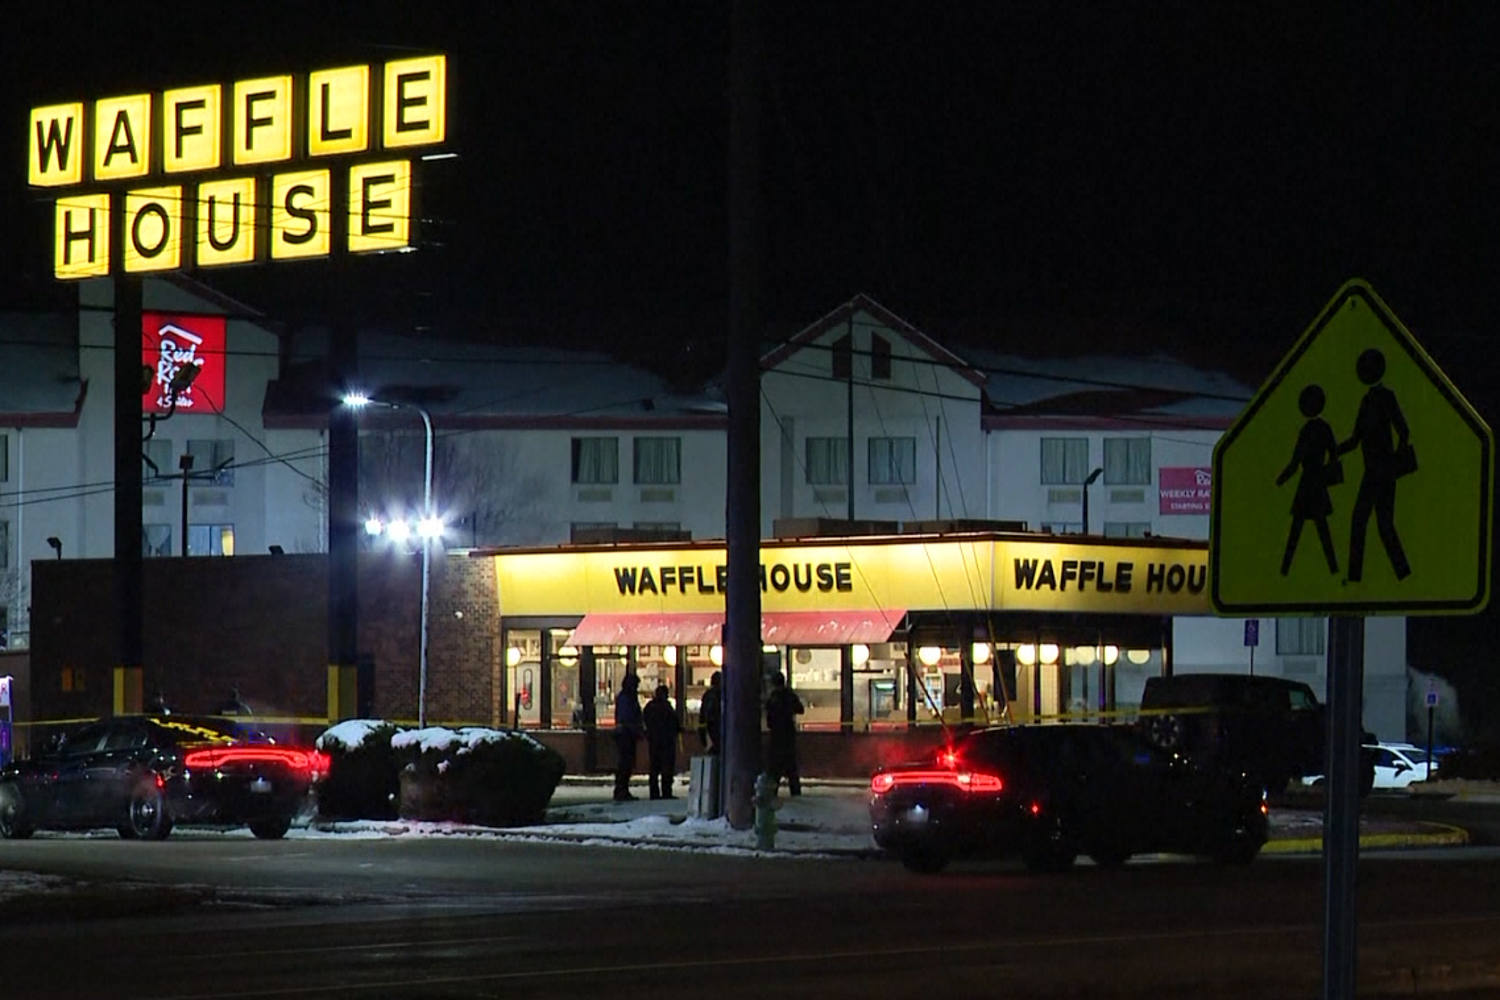 At least 1 dead, 5 injured in shooting at Indianapolis Waffle House